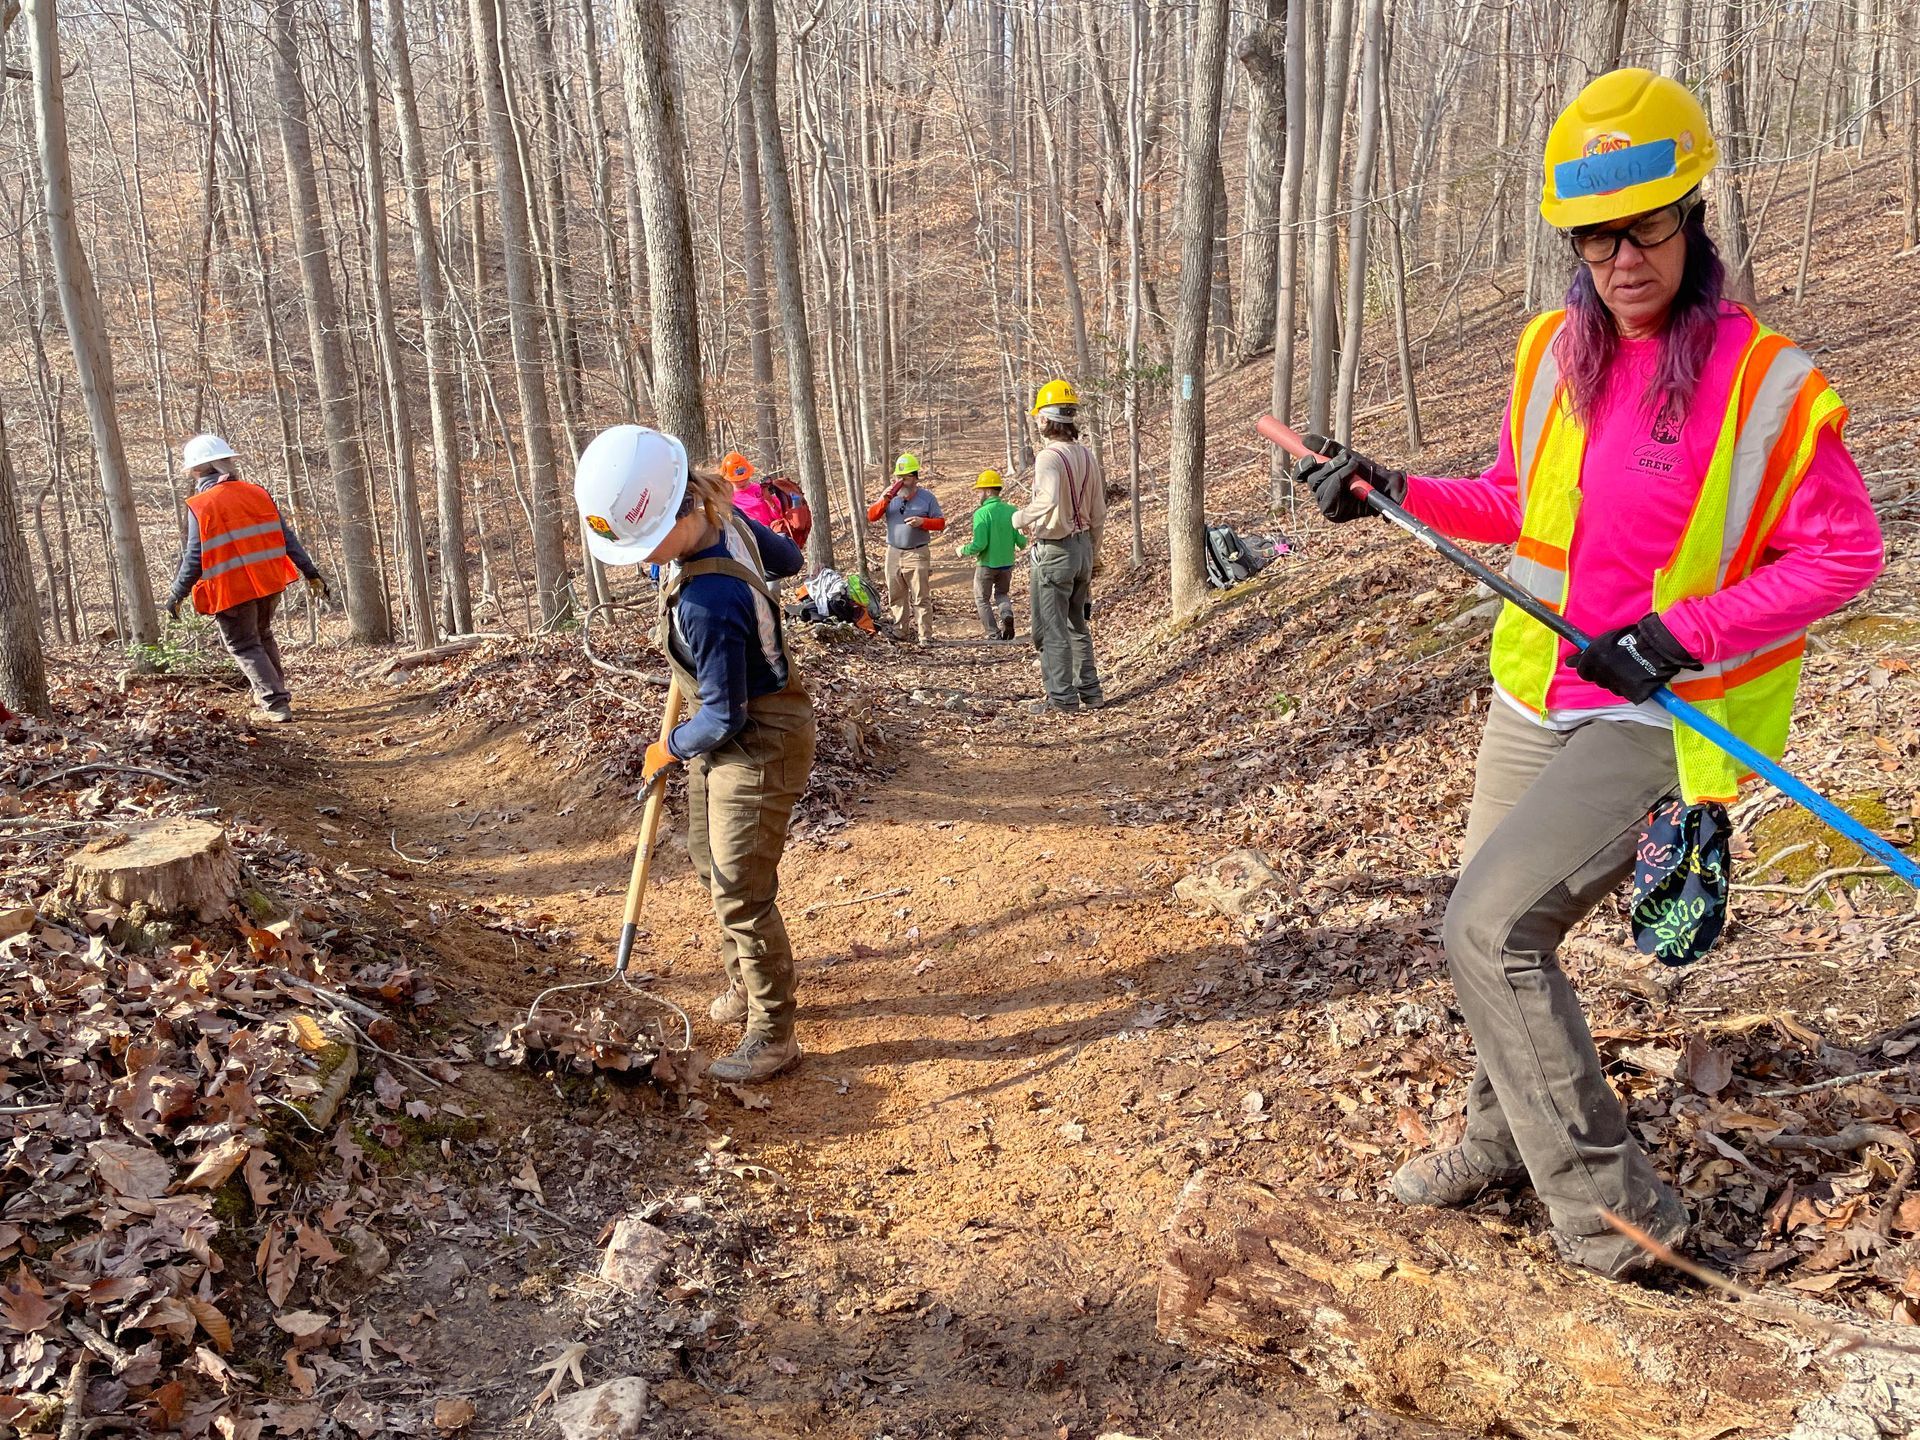 Multiple PATC volunteers, wearing hardhats and vests, using tools to perform trail maintence.